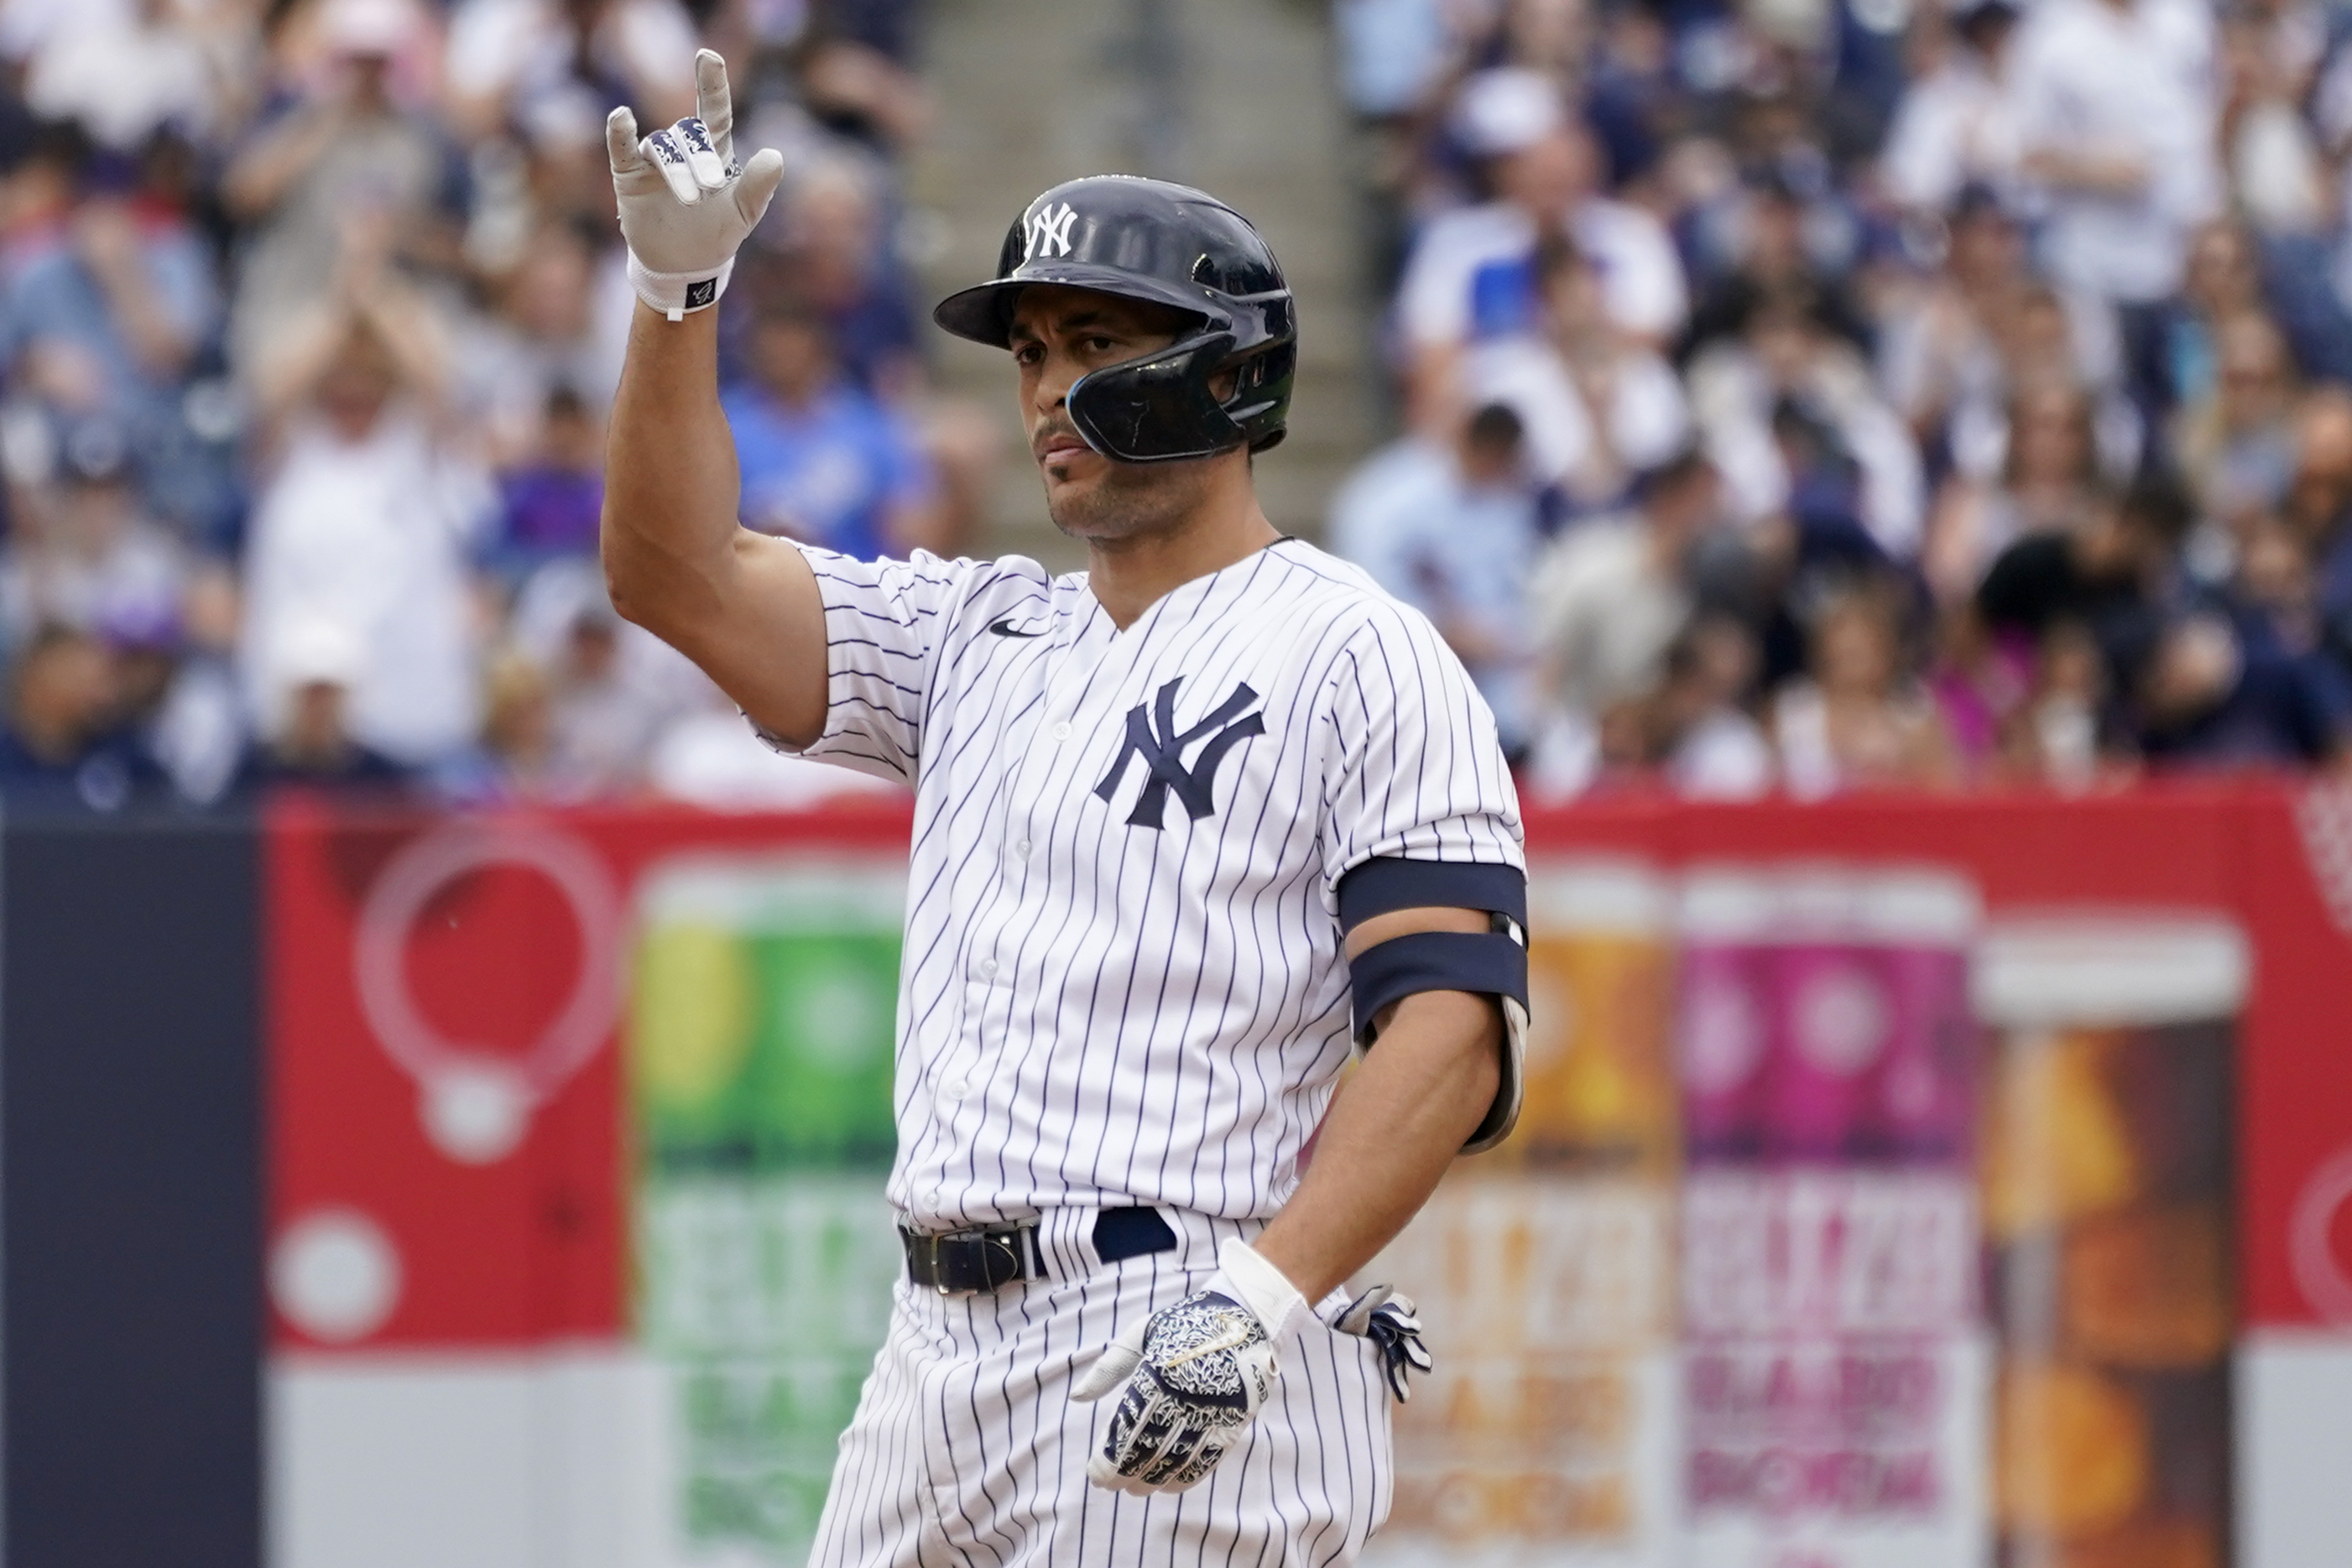 Carpenter hammers Cubs; 2 HRs, 7 RBIs in Yanks' 18-4 rout